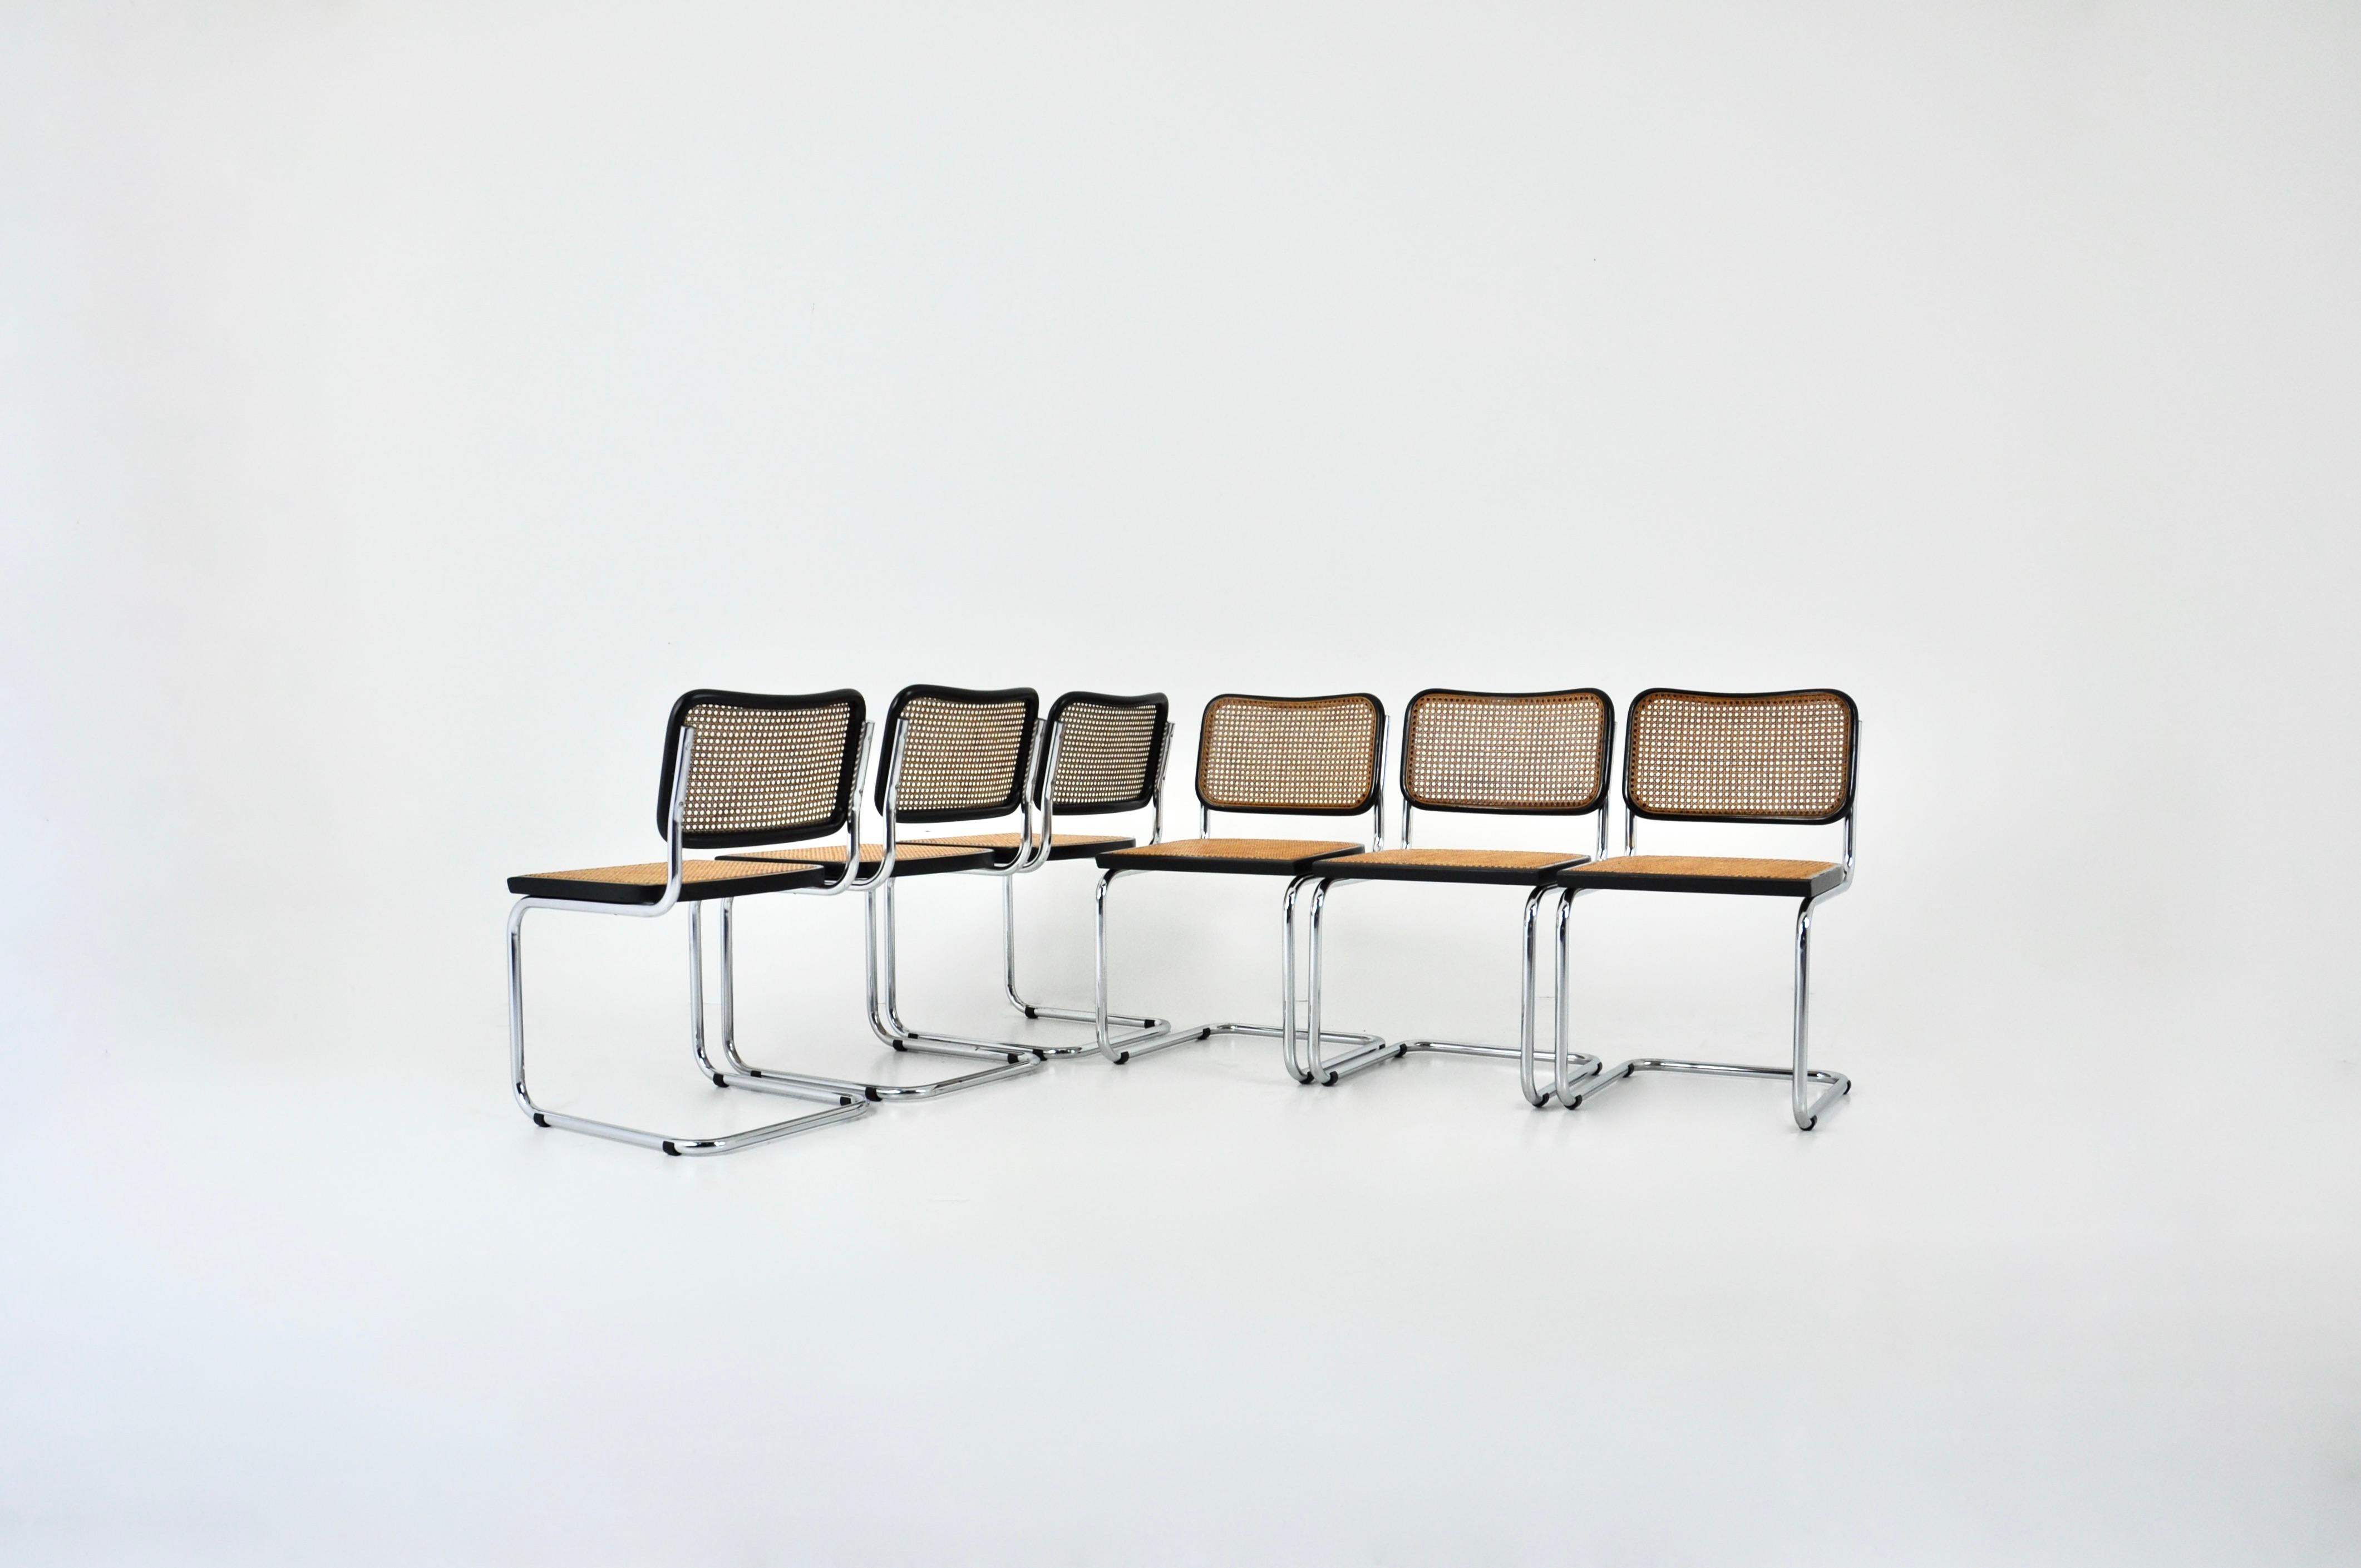 Set of 8 chairs in metal, wood and cane. Measure: seat height: 46cm. Wear due to time and age of the chairs.